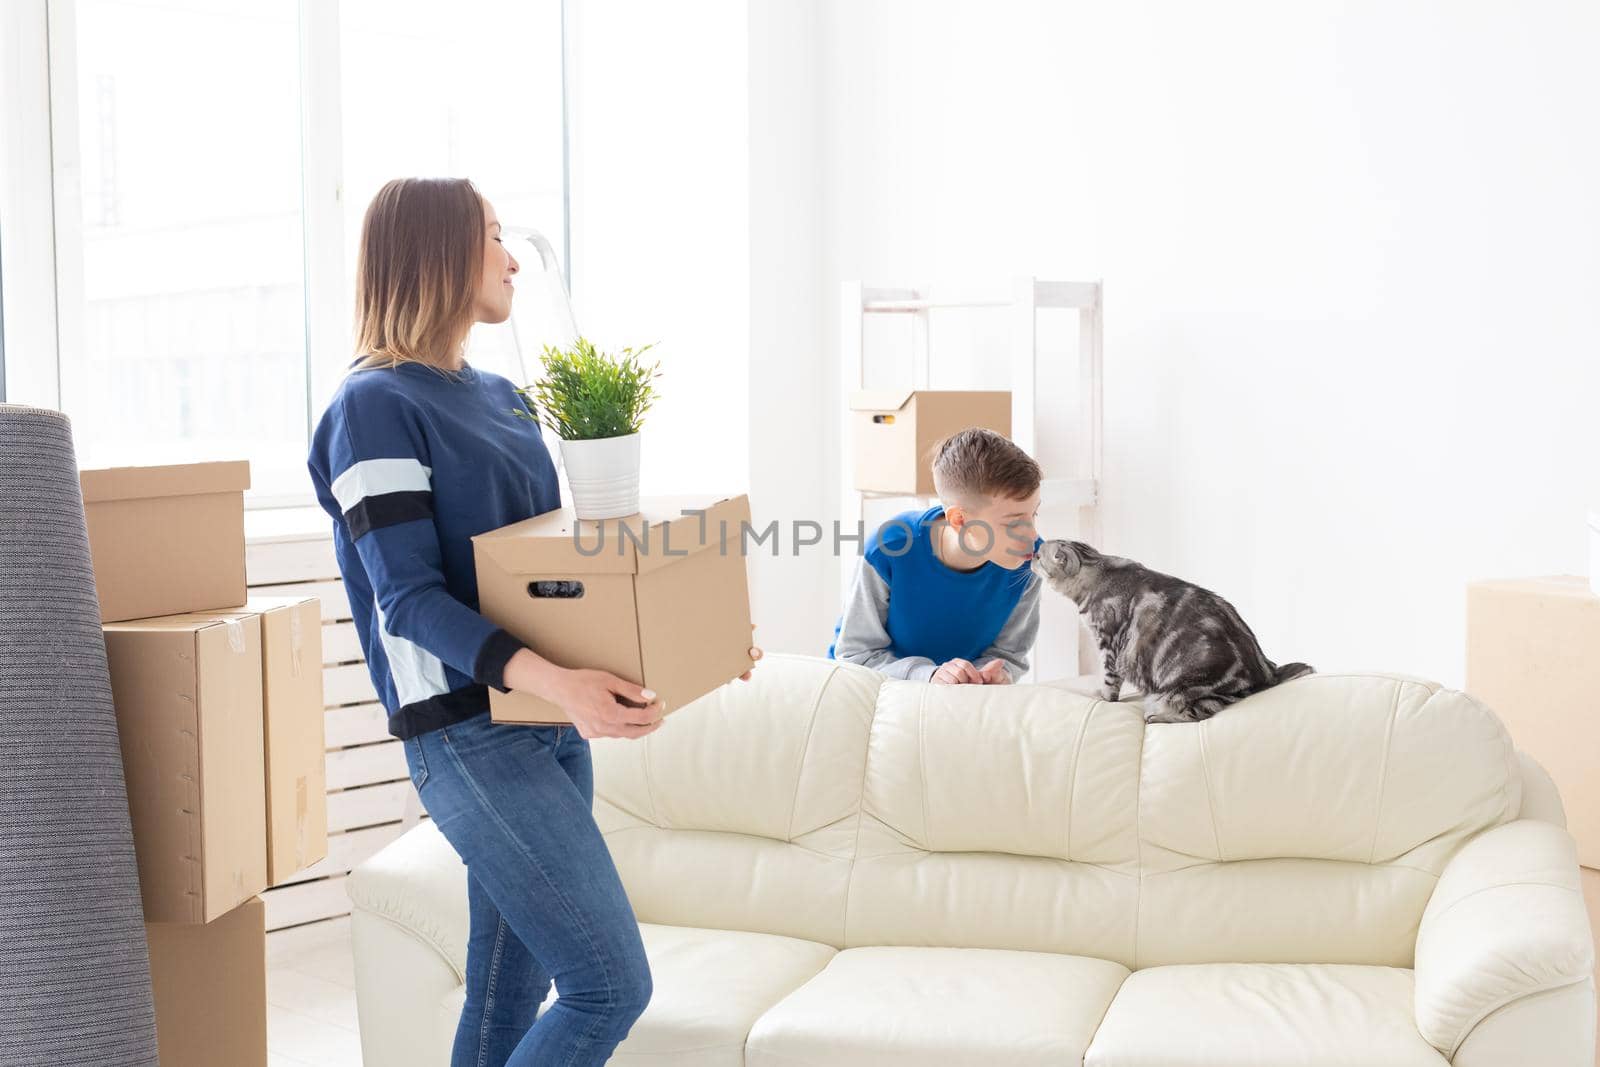 Slim positive young mother and a cute boy son arrange things and communicate with their scottish fold cat. Housewarming and relocation concept by Satura86